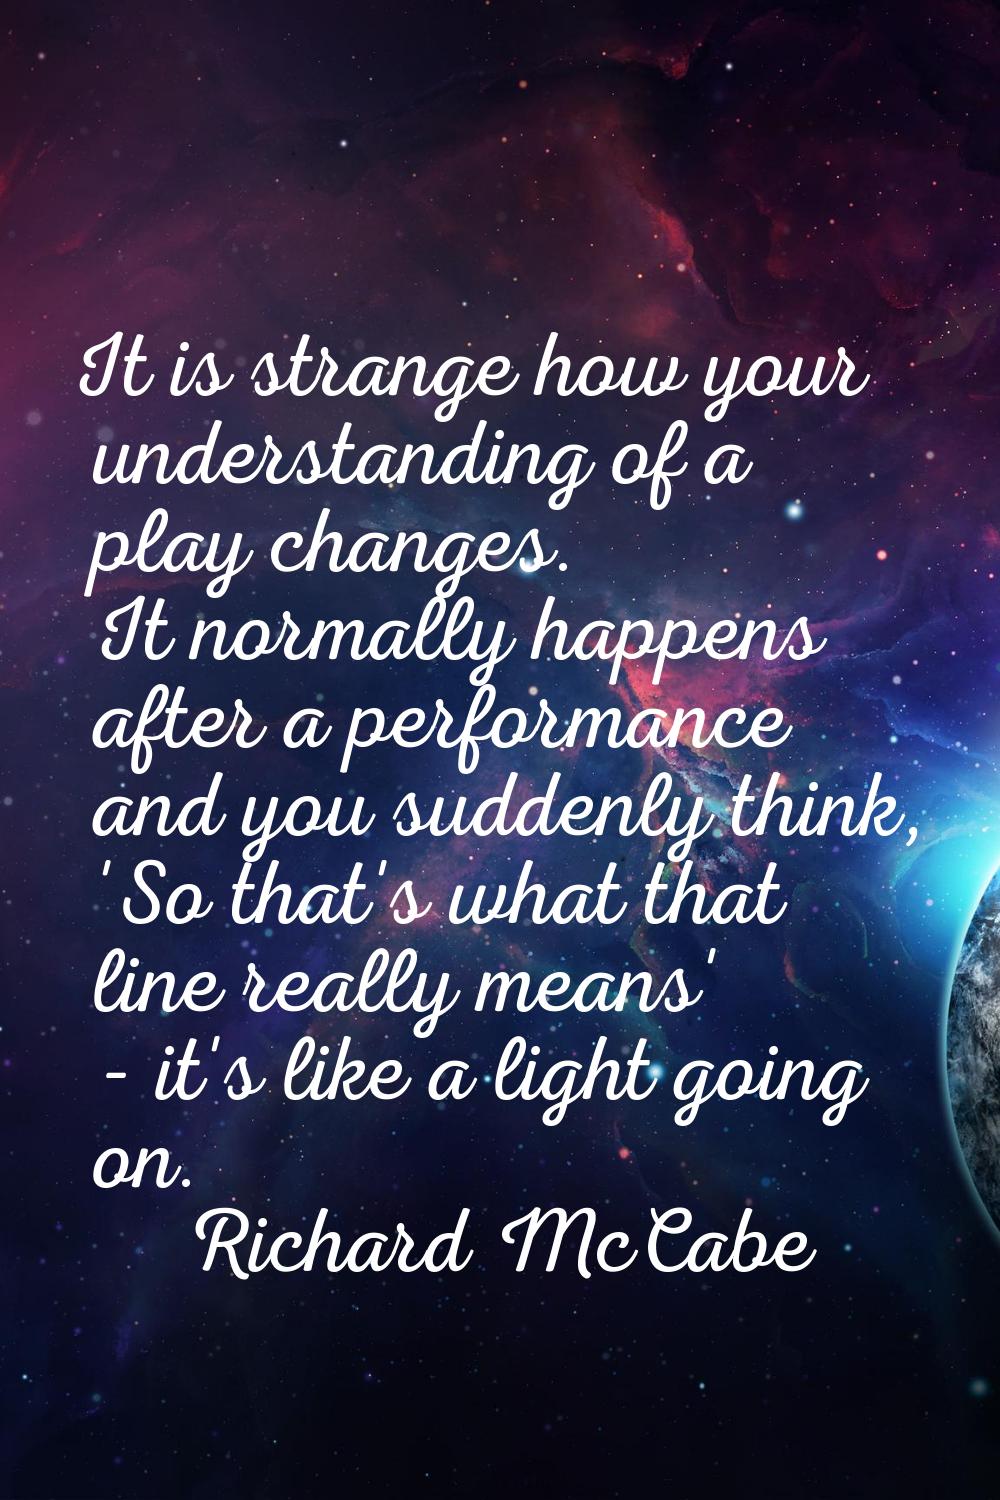 It is strange how your understanding of a play changes. It normally happens after a performance and